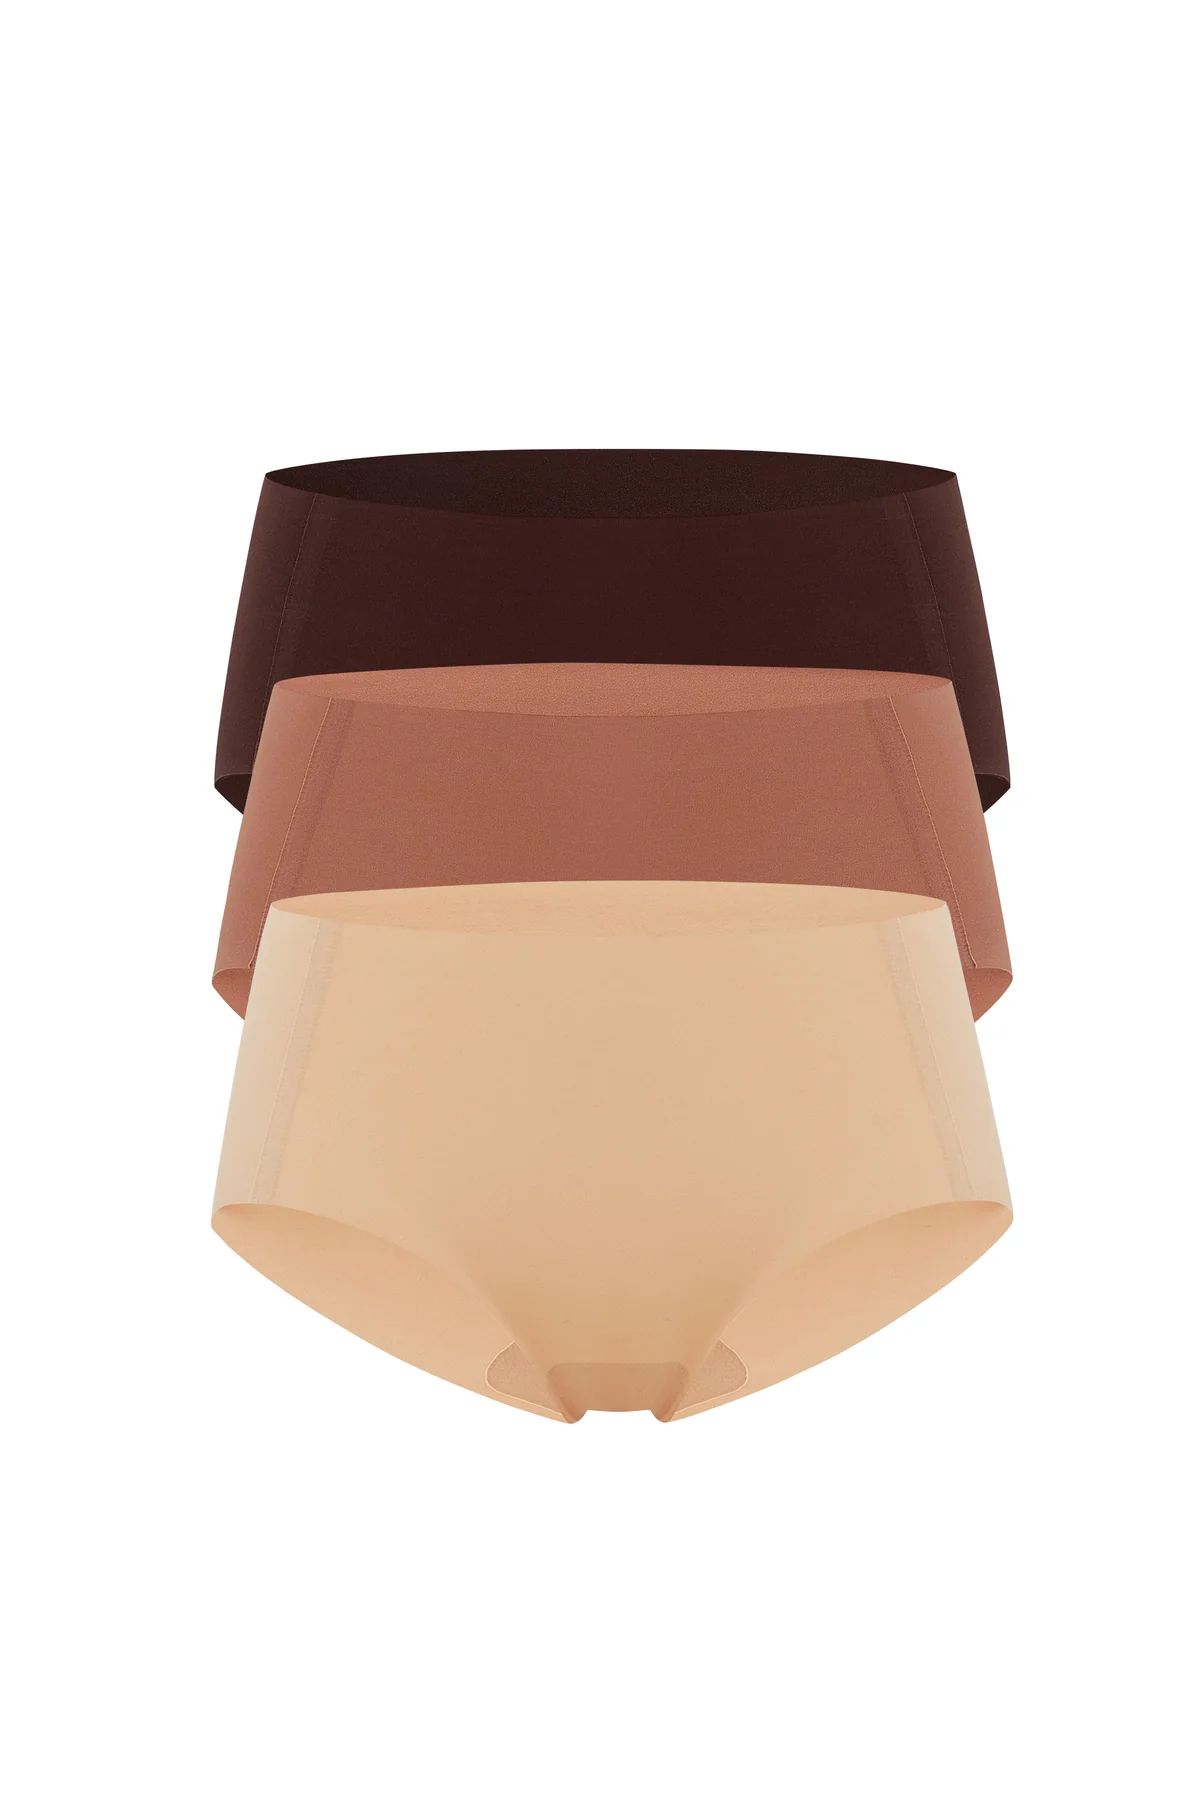 2021 Barely Zero® Your-Size-Is-The-Size Mid Waist Brief Trio (Pre-Order) | NEIWAI